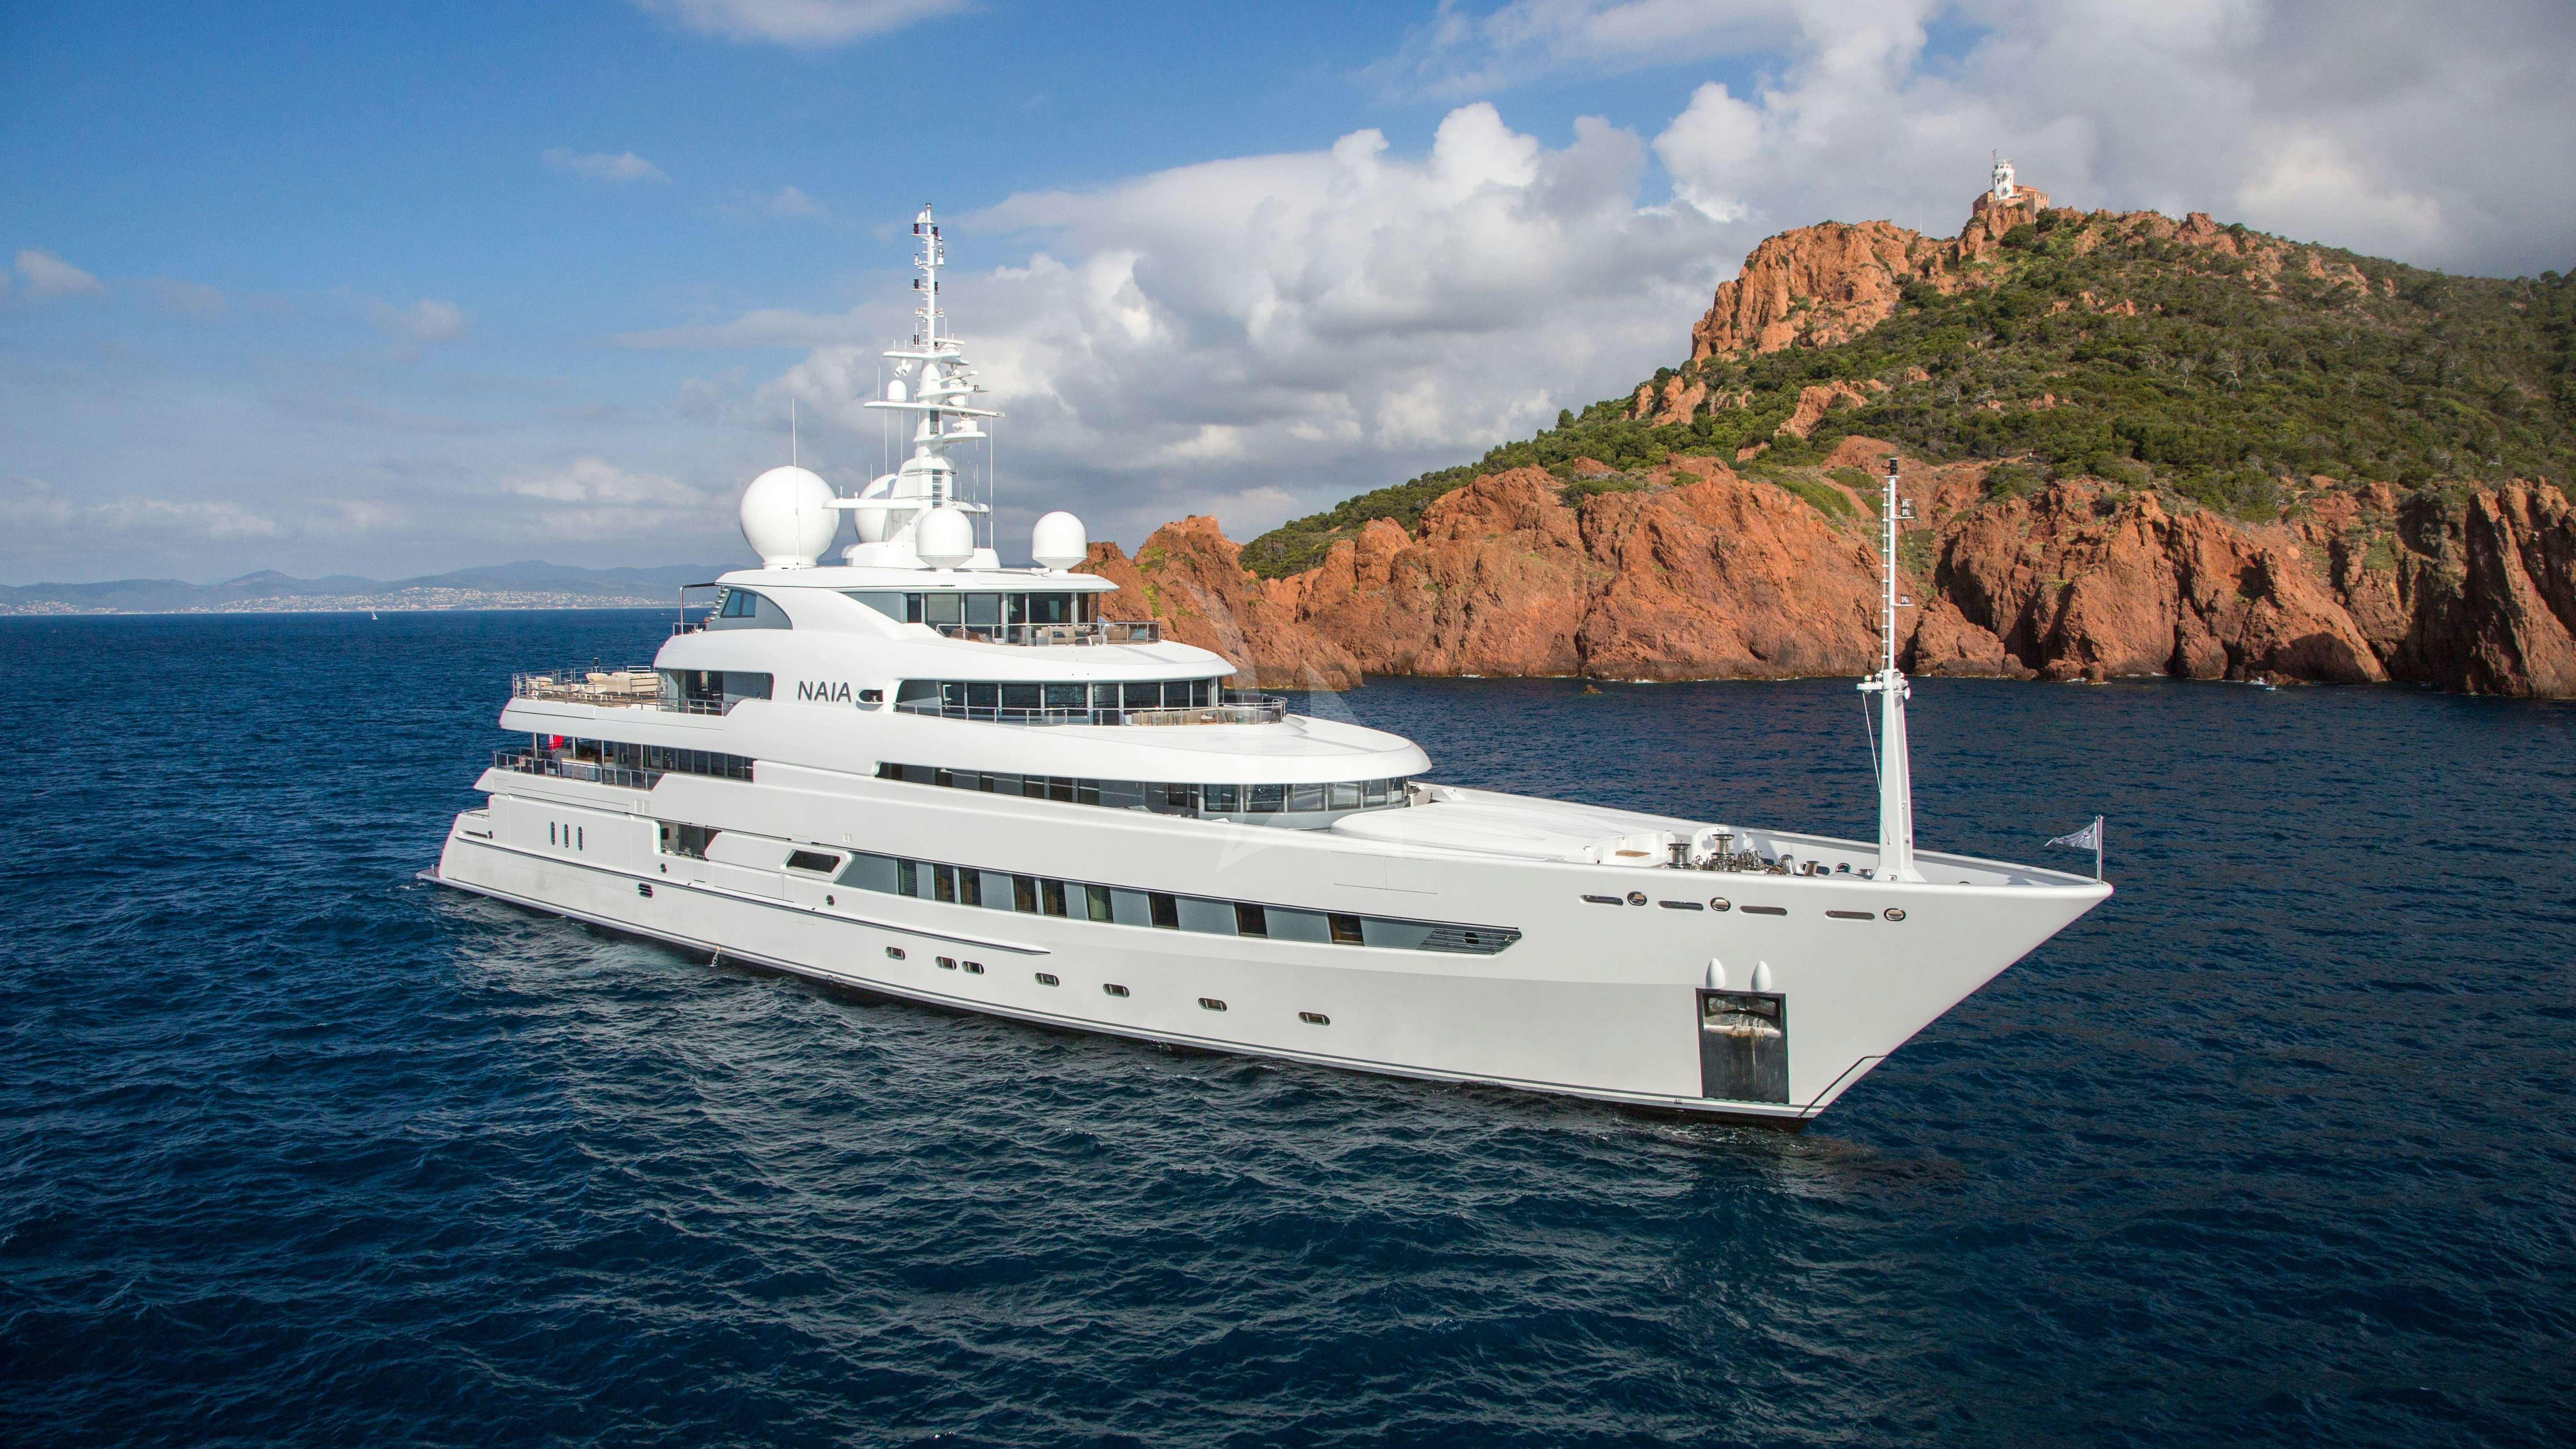 Watch Video for NAIA Yacht for Charter